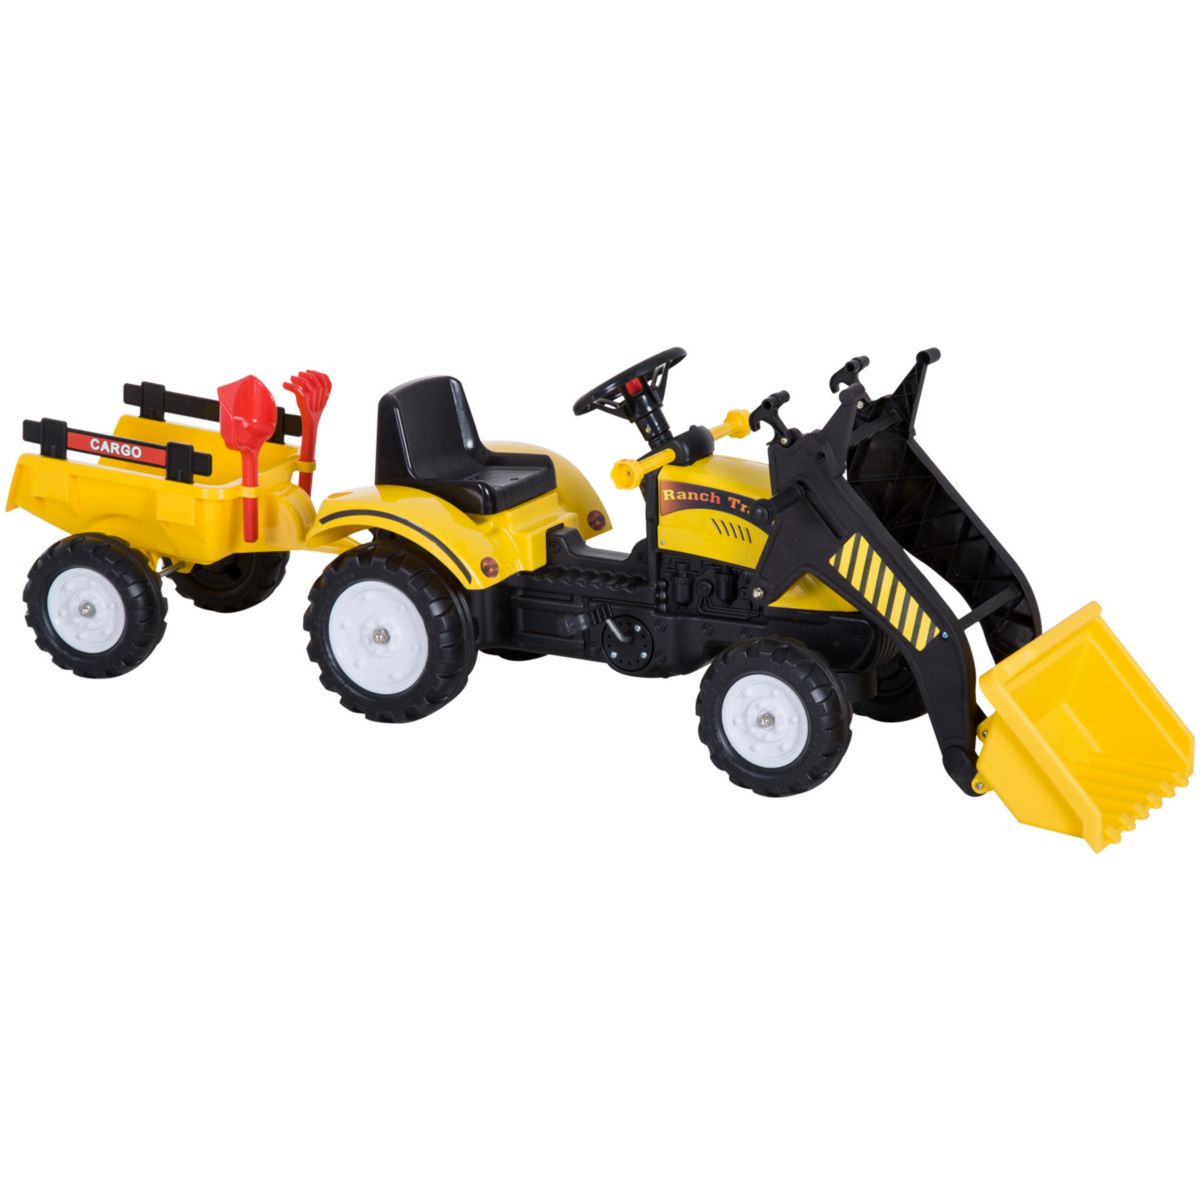 Aosom Ride On Kids Bulldozer/Excavator Toy with Real Working Dirt Bucket Easy Pedal Controls 6 Wheels and Cargo Trailer Aosom